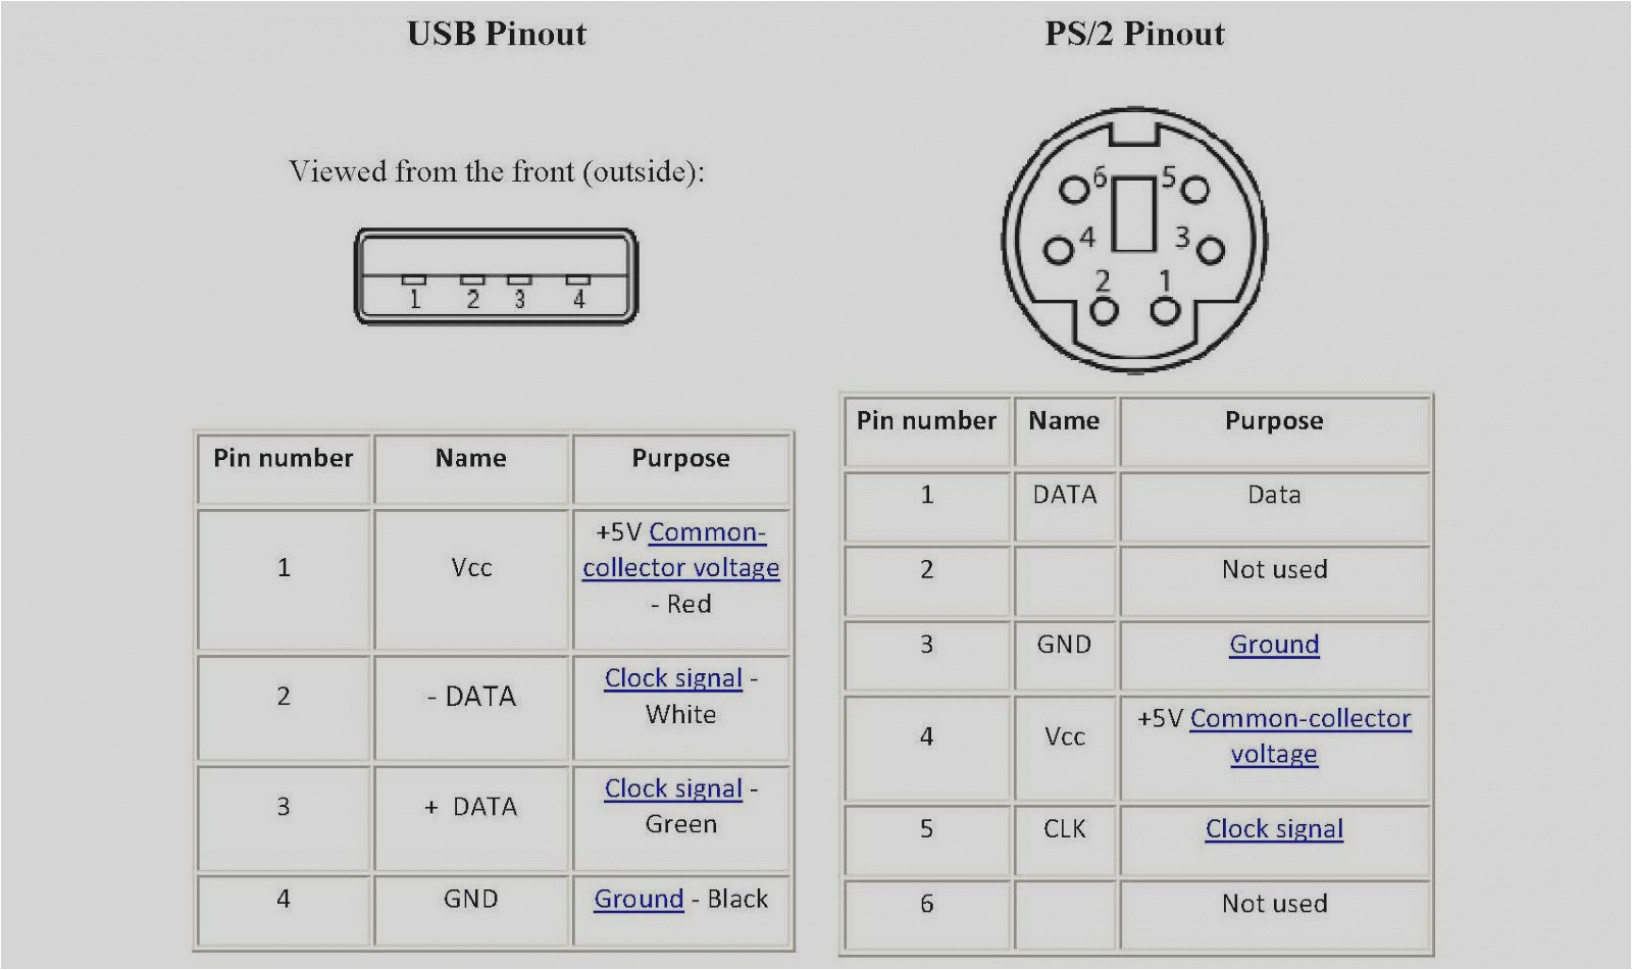 ps2 mouse pinout diagram wiring diagram ps2 to usb pinout ps2 mouse pinout diagram